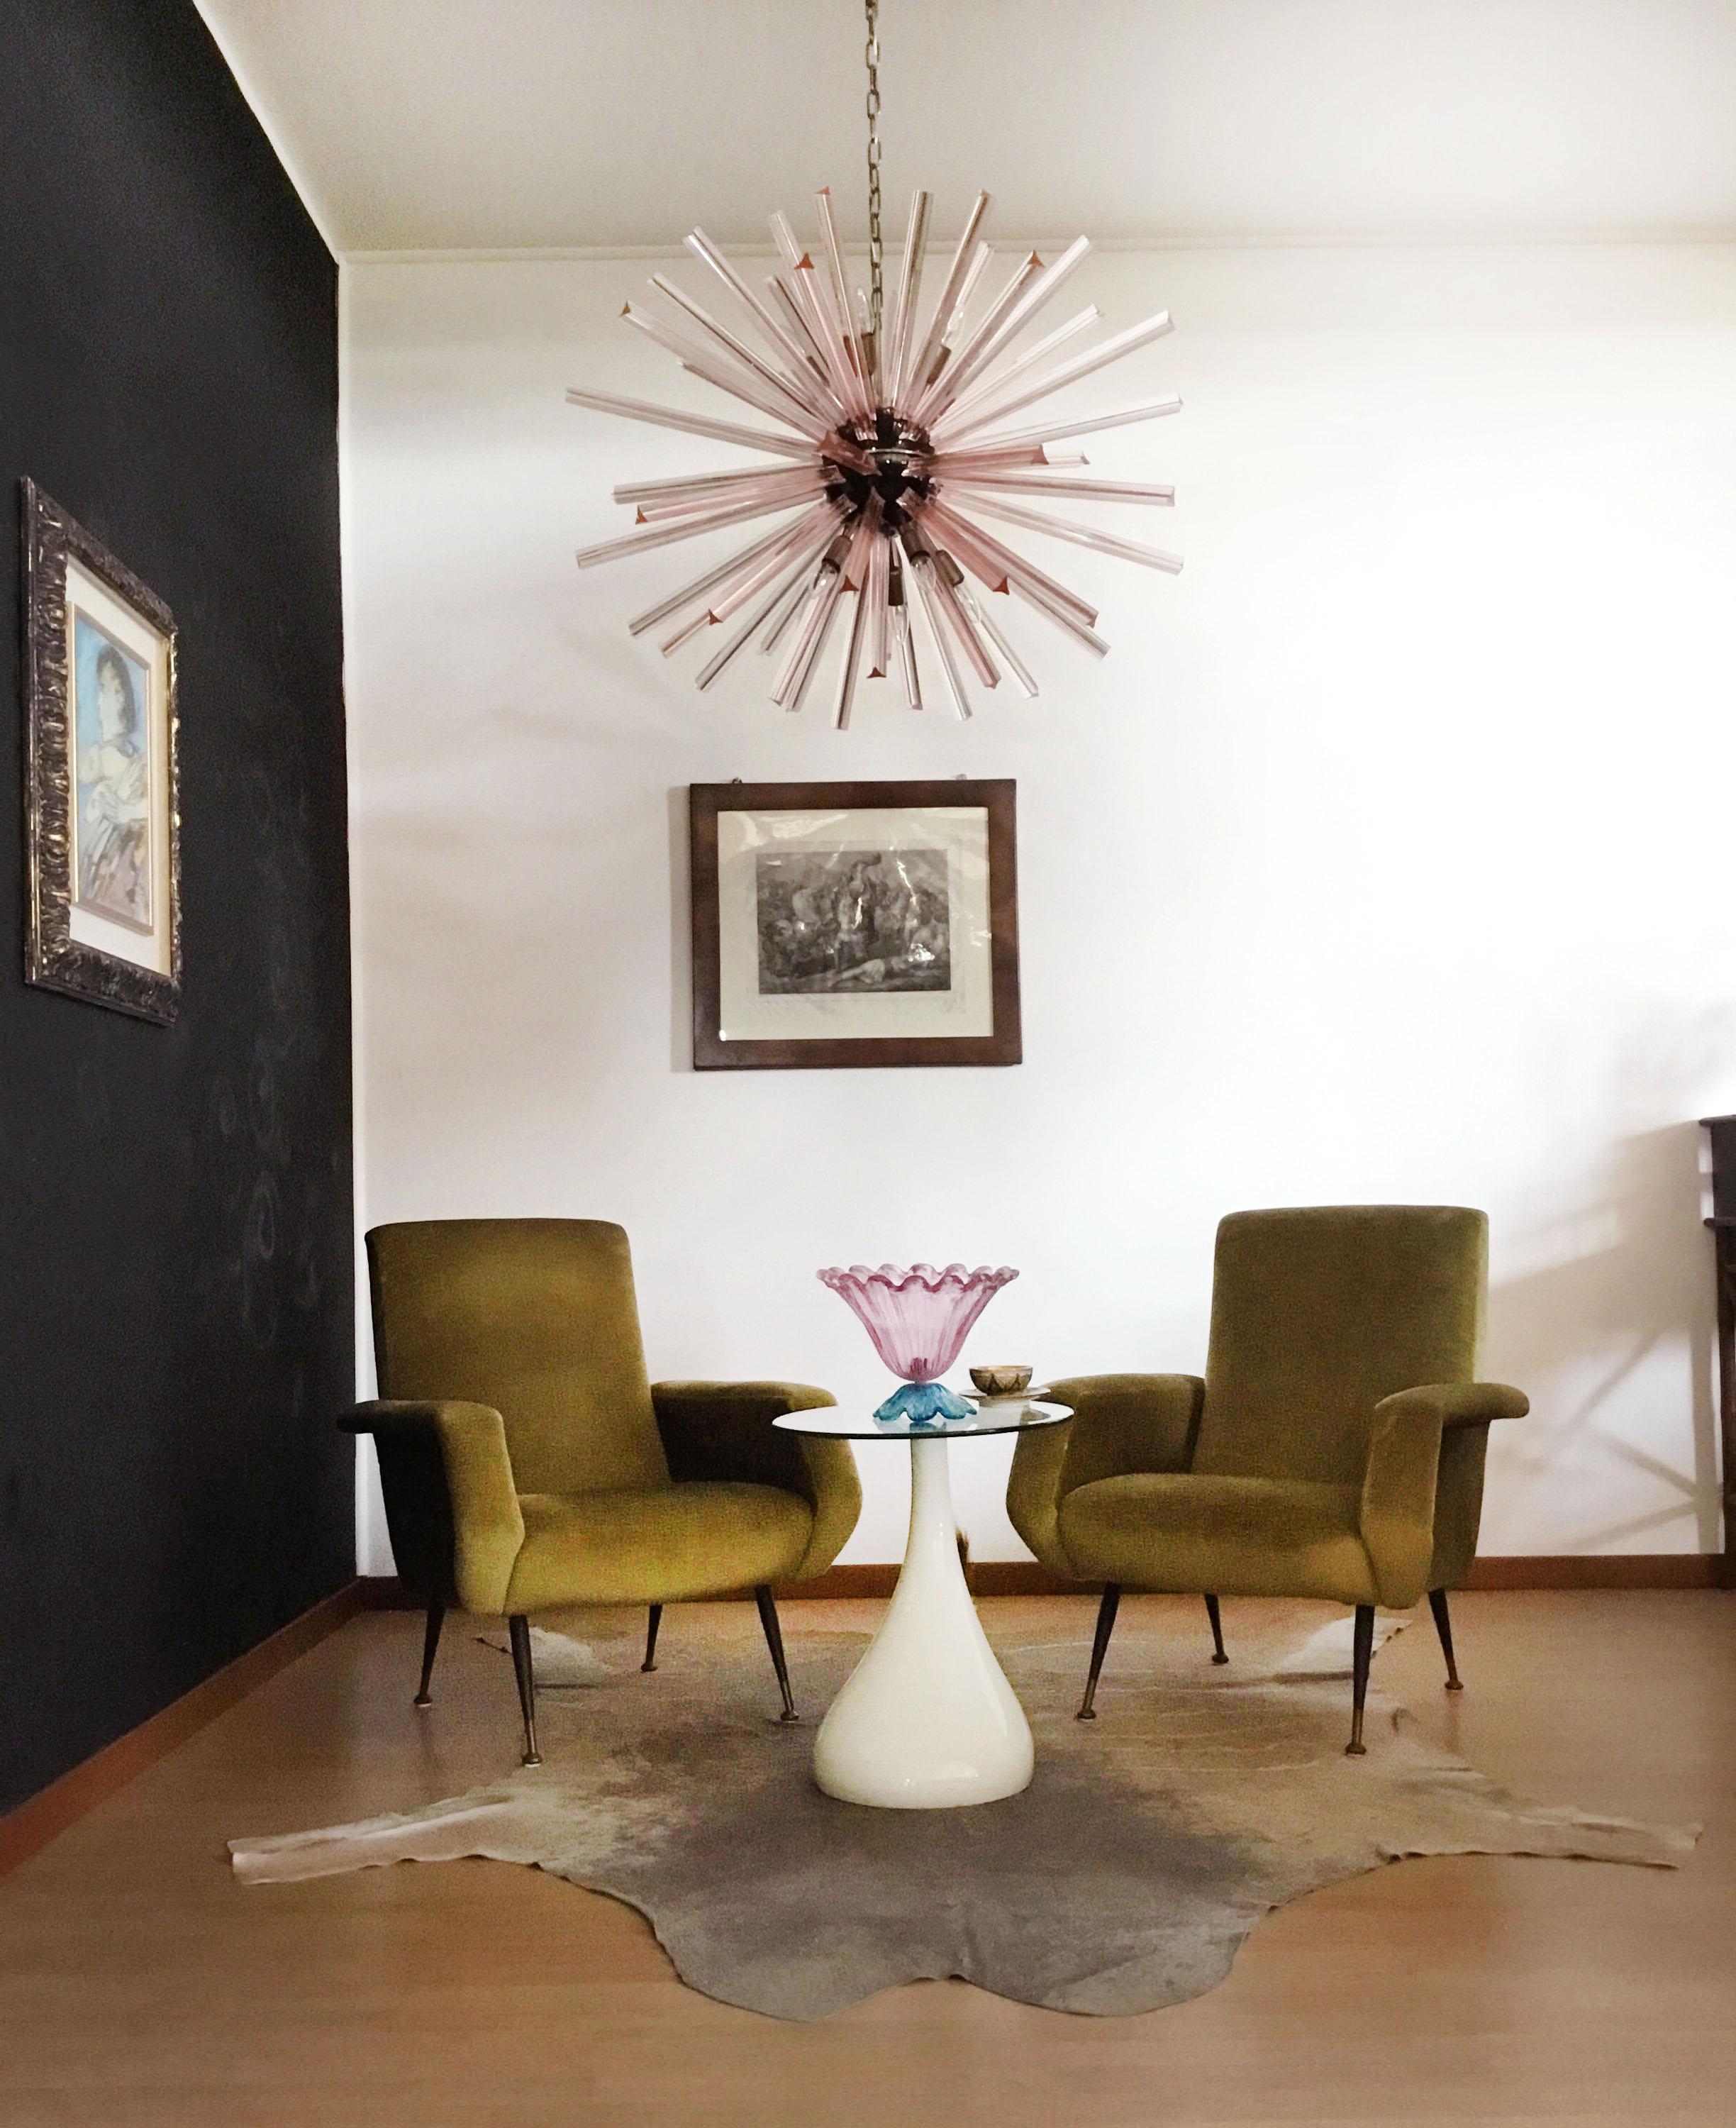 Sputnik chandelier surrounding 50 pink glass 'triedri' prisms radiating from a center black metal nucleus. Brass lamp holder.
Period: late xx century
Dimensions: 51,20 inches (130 cm) height with chain; 27,55 inches (70 cm) height without chain;